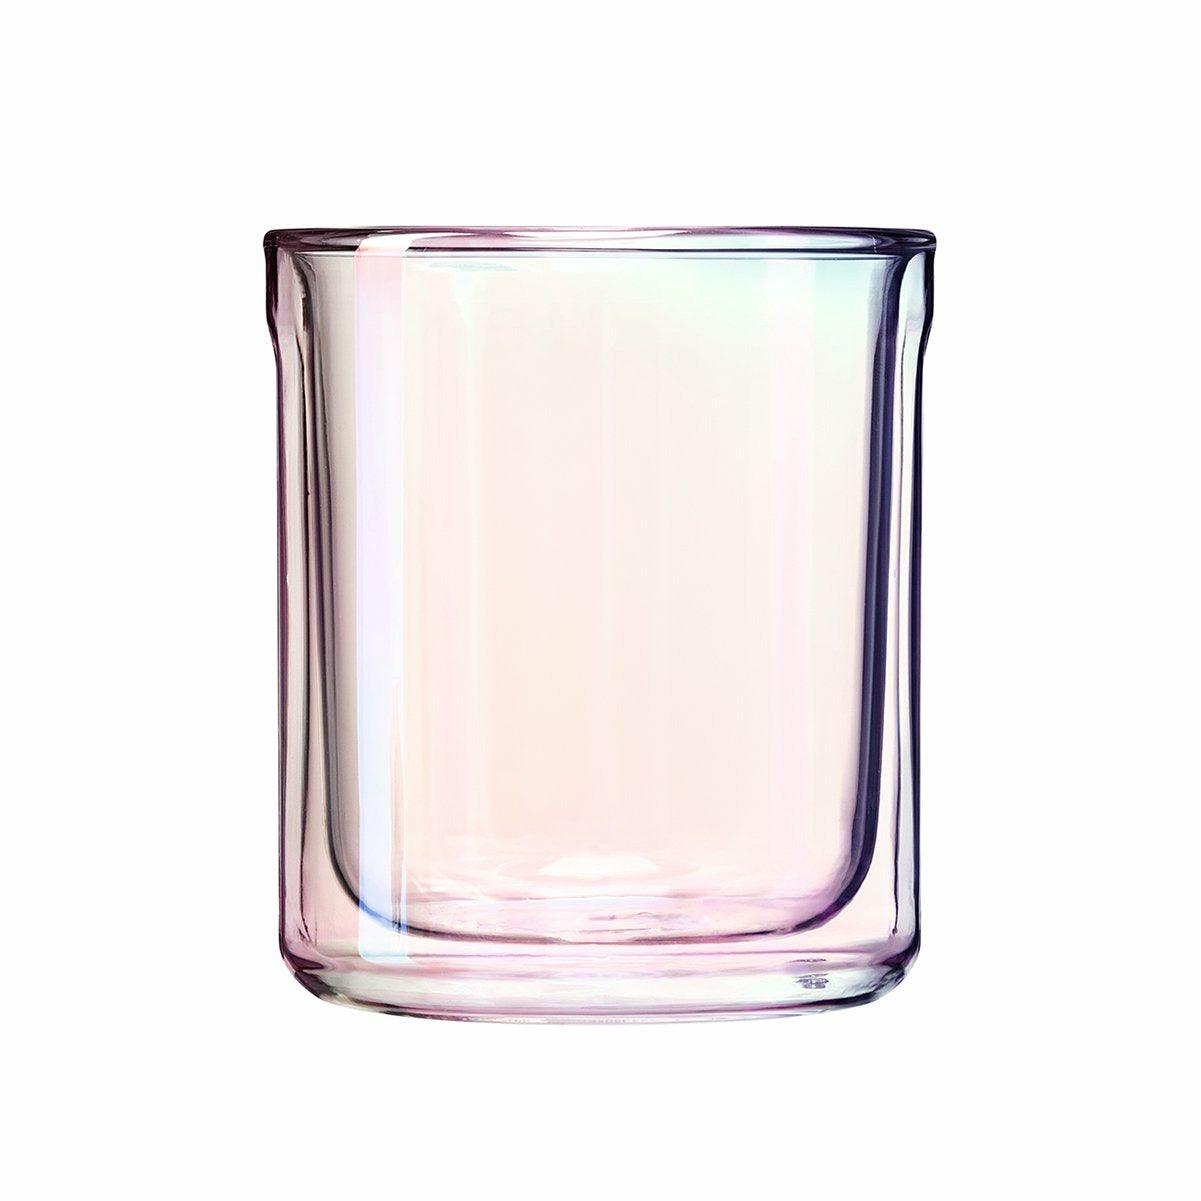 Corkcicle Double-Walled Stemless Prism Flute Glasses, Set of 2, 7